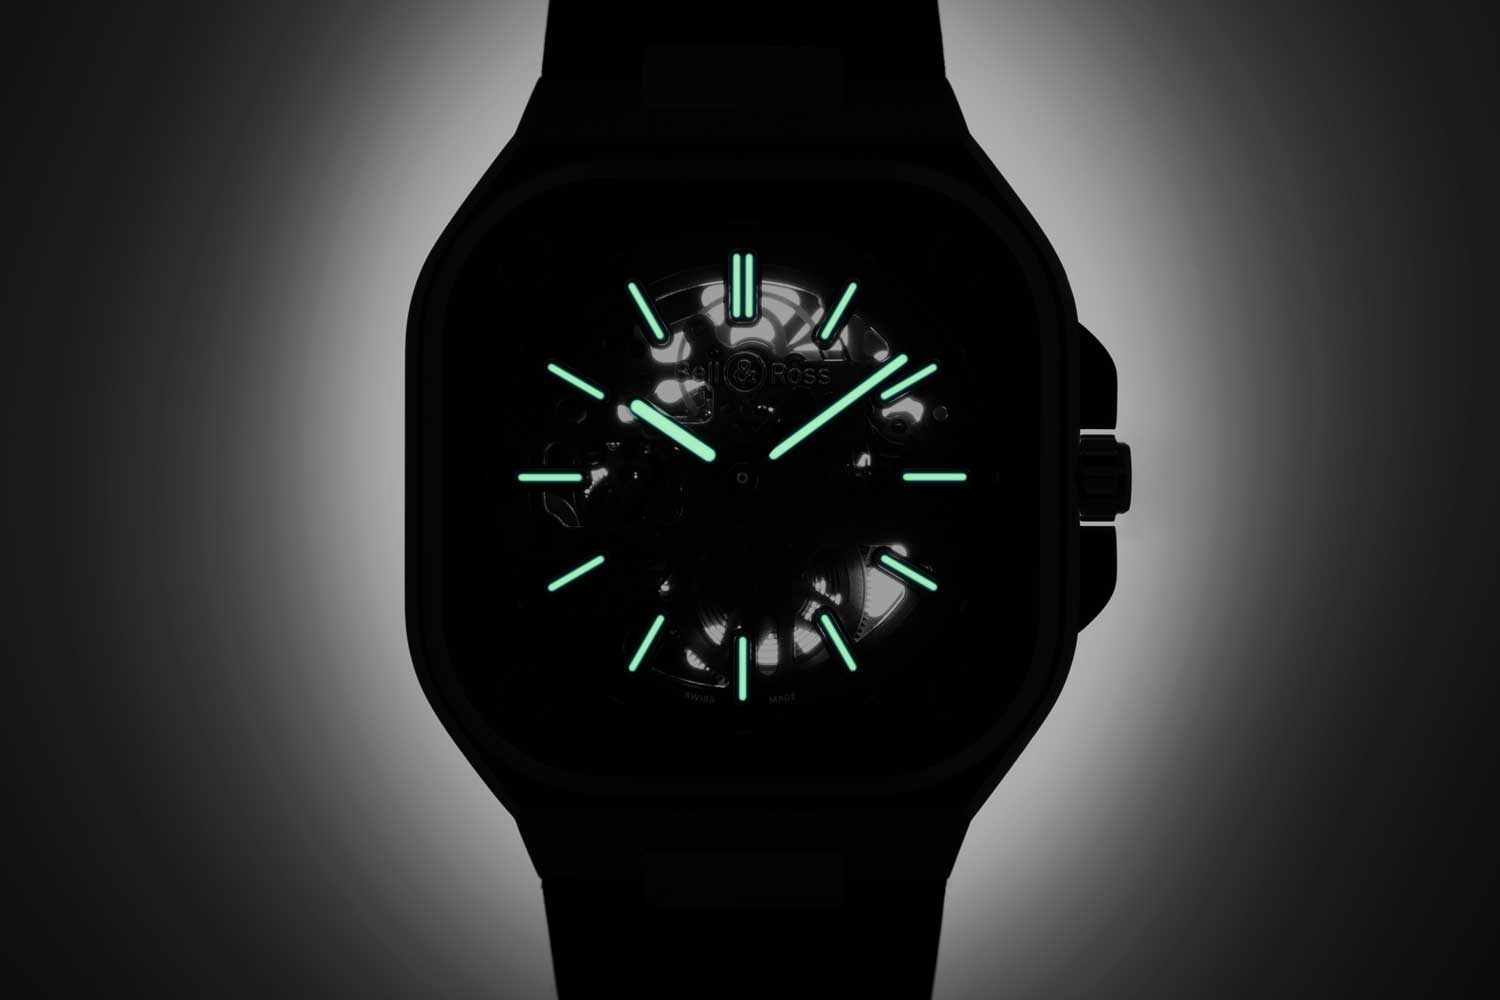 The metallic indexes, hour and minute hands, are filled with strong green C5 SuperLuminova